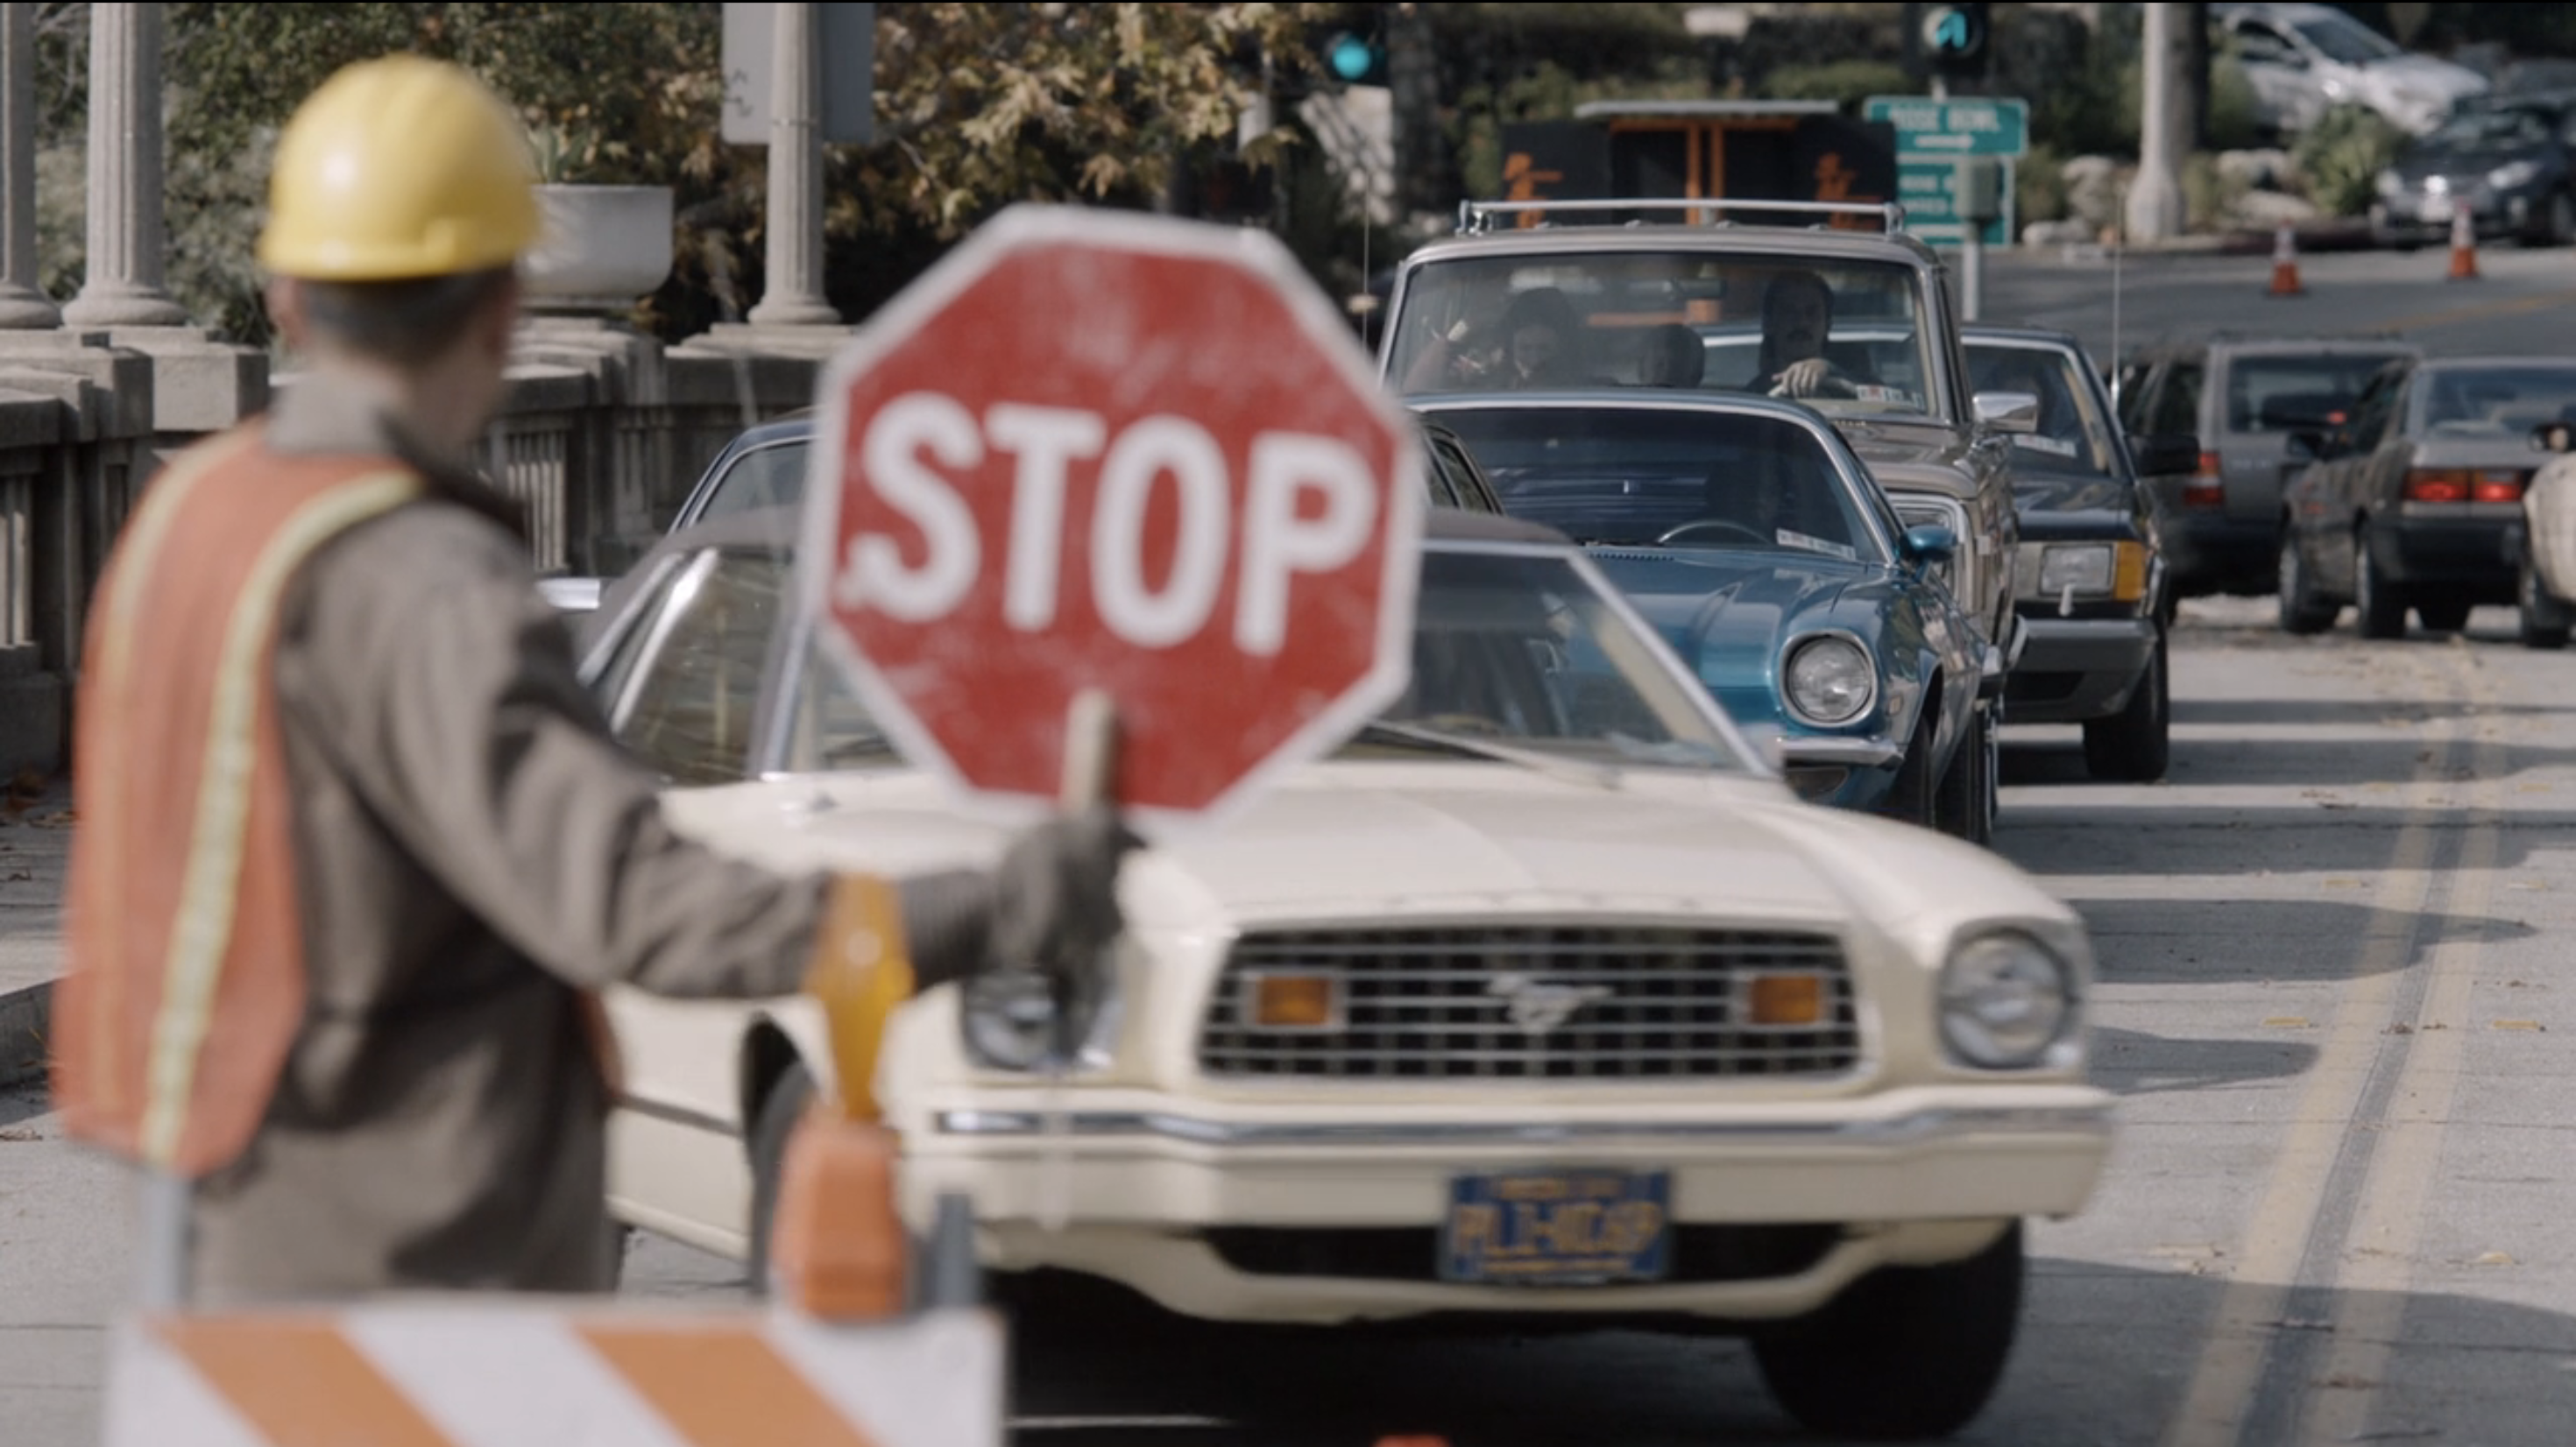 A construction worker holds a &quot;STOP&quot; sign, halting a line of cars on a city street, including a classic Ford Mustang with license plate at the front